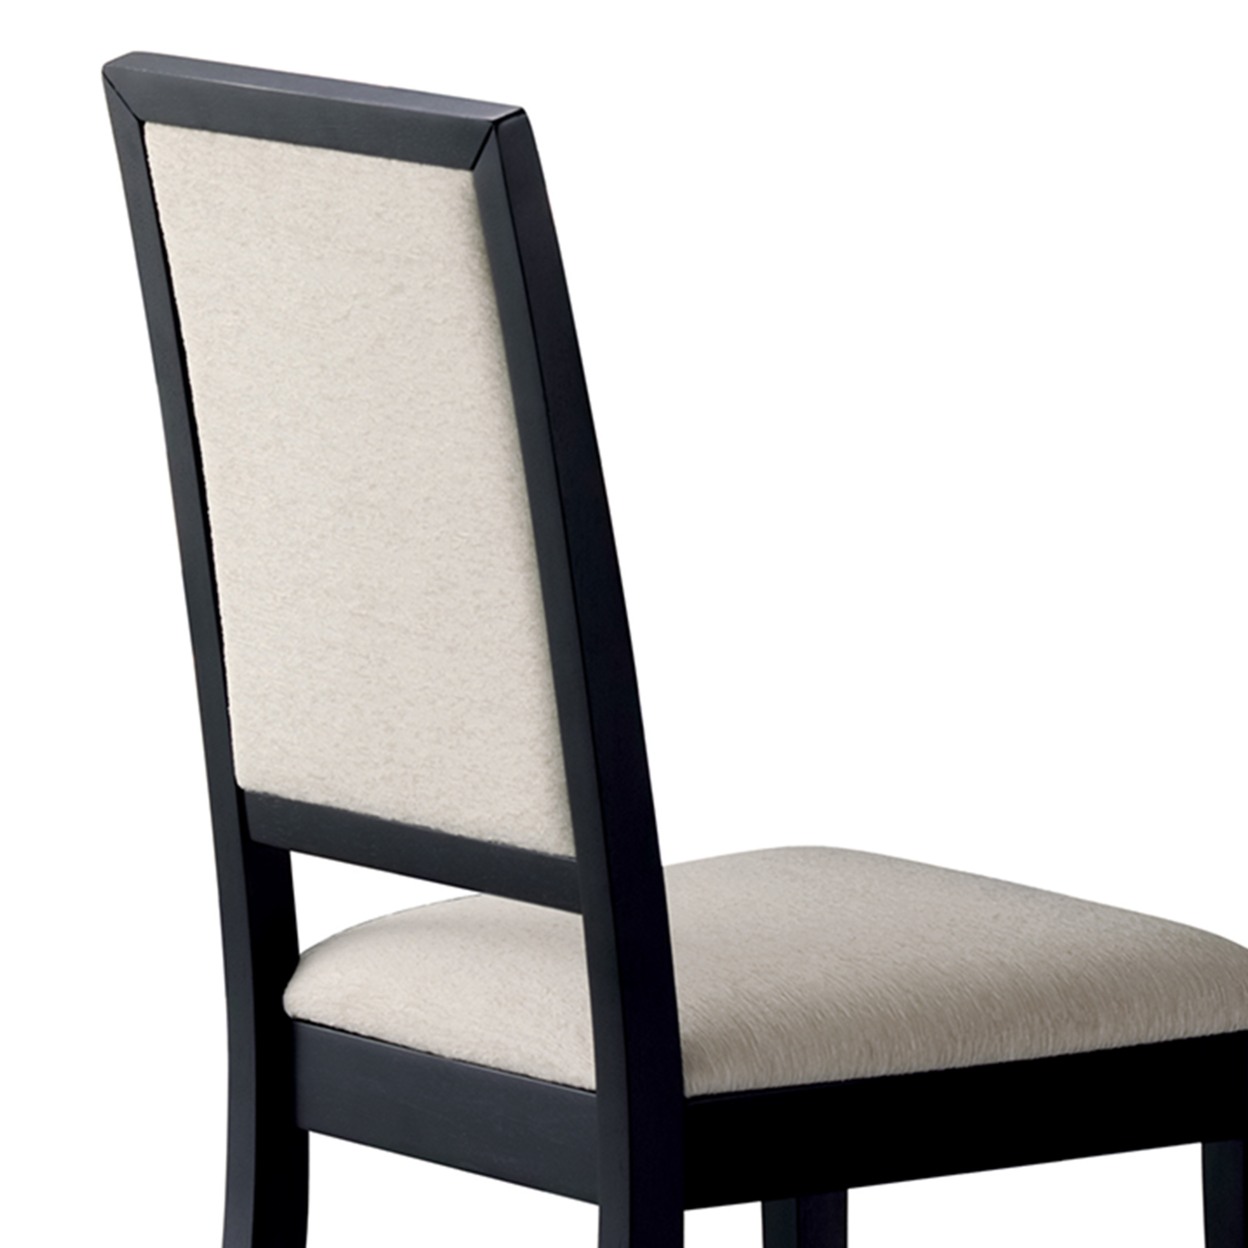 Wooden Dining Side Chair With Cream Upholstered Seat And Back, Black, Set Of 2- Saltoro Sherpi